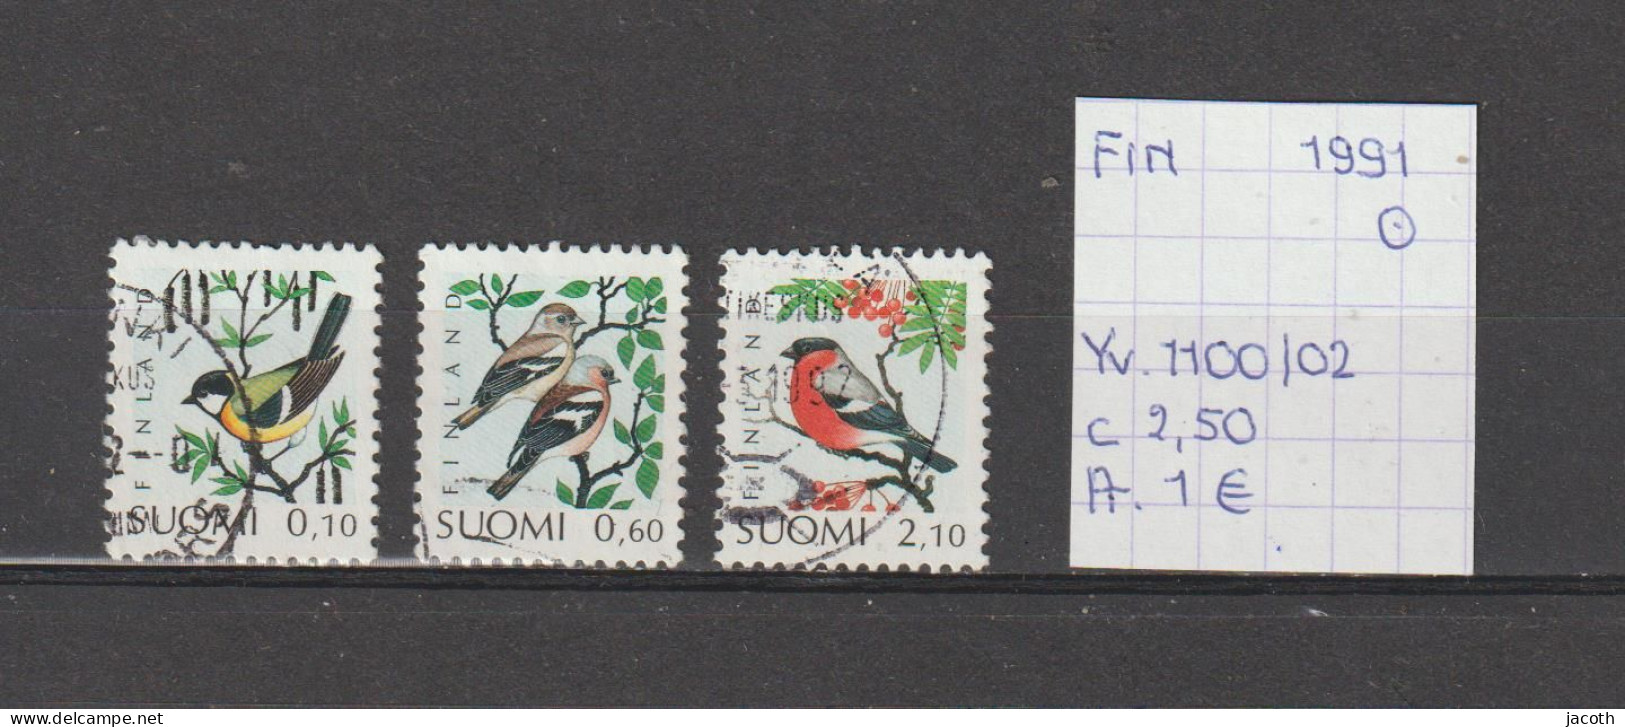 (TJ) Finland 1991 - YT 1100/02 (gest./obl./used) - Used Stamps